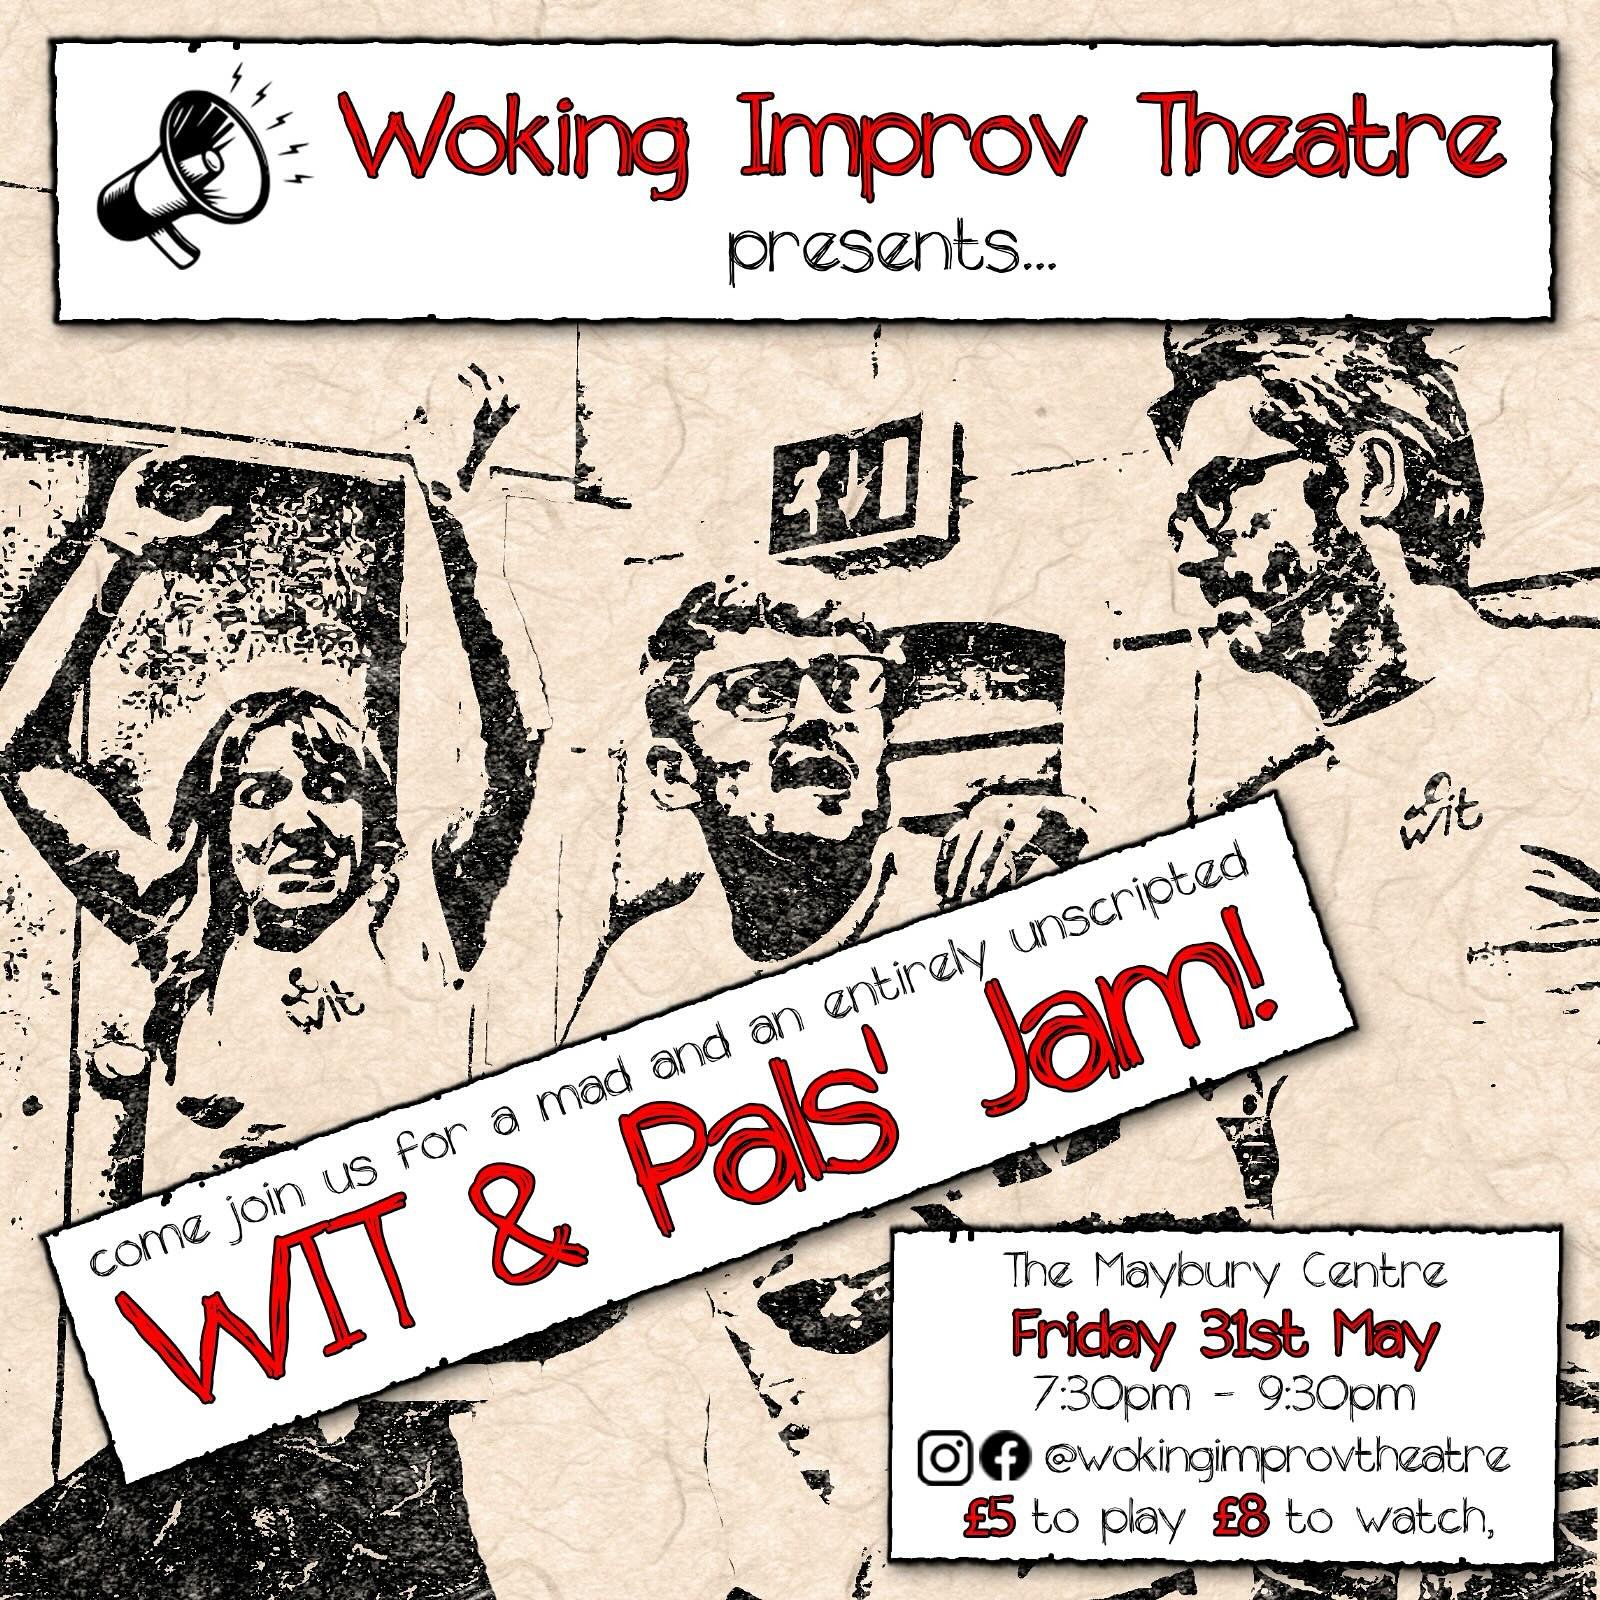 Hey hey world! We&rsquo;re doing a jam on May 31st and it&rsquo;s for WIT, our wider network of improv pals and anyone who wants to watch and see what happens in an improv class or at an improv jam. It&rsquo;ll be two joyous hours&rsquo; of non-stop 